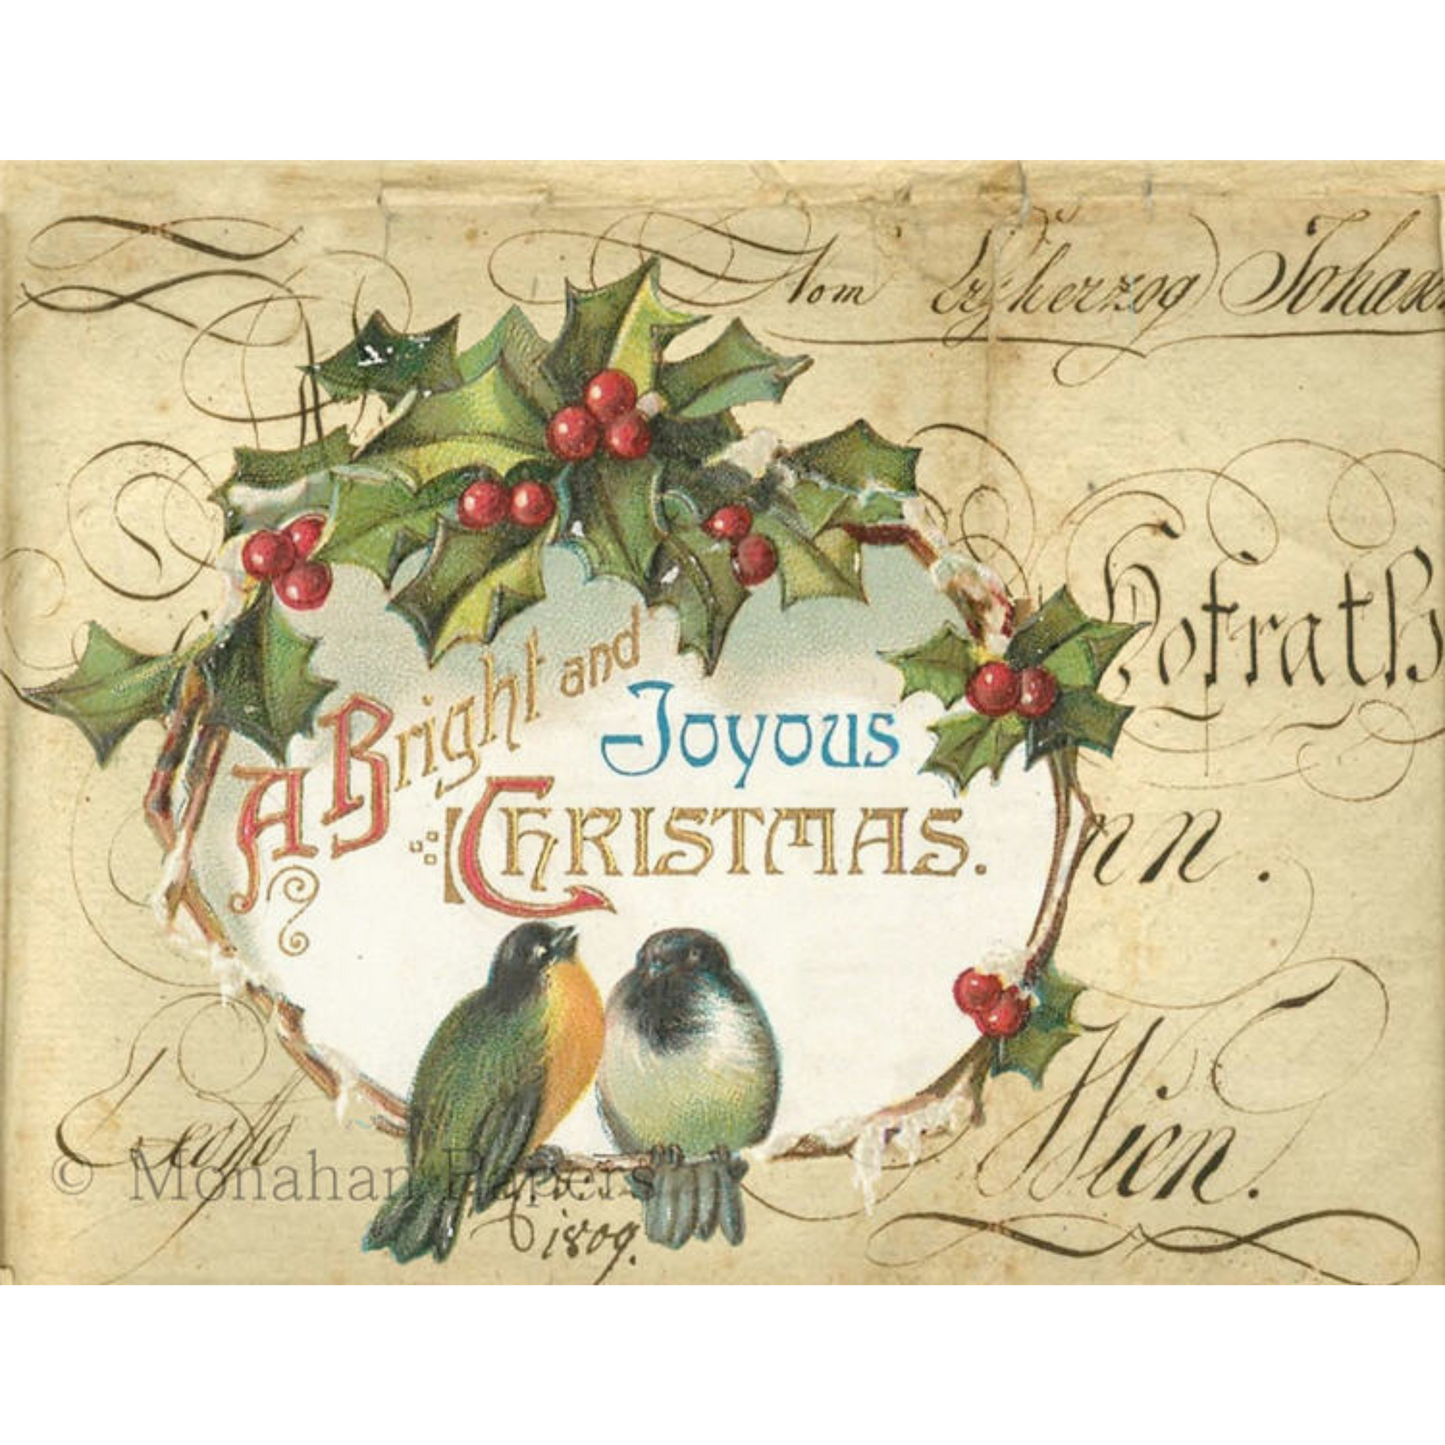 "A Bright and Joyous Christmas" Decoupage Paper by Monahan Papers available at Milton's Daughter.